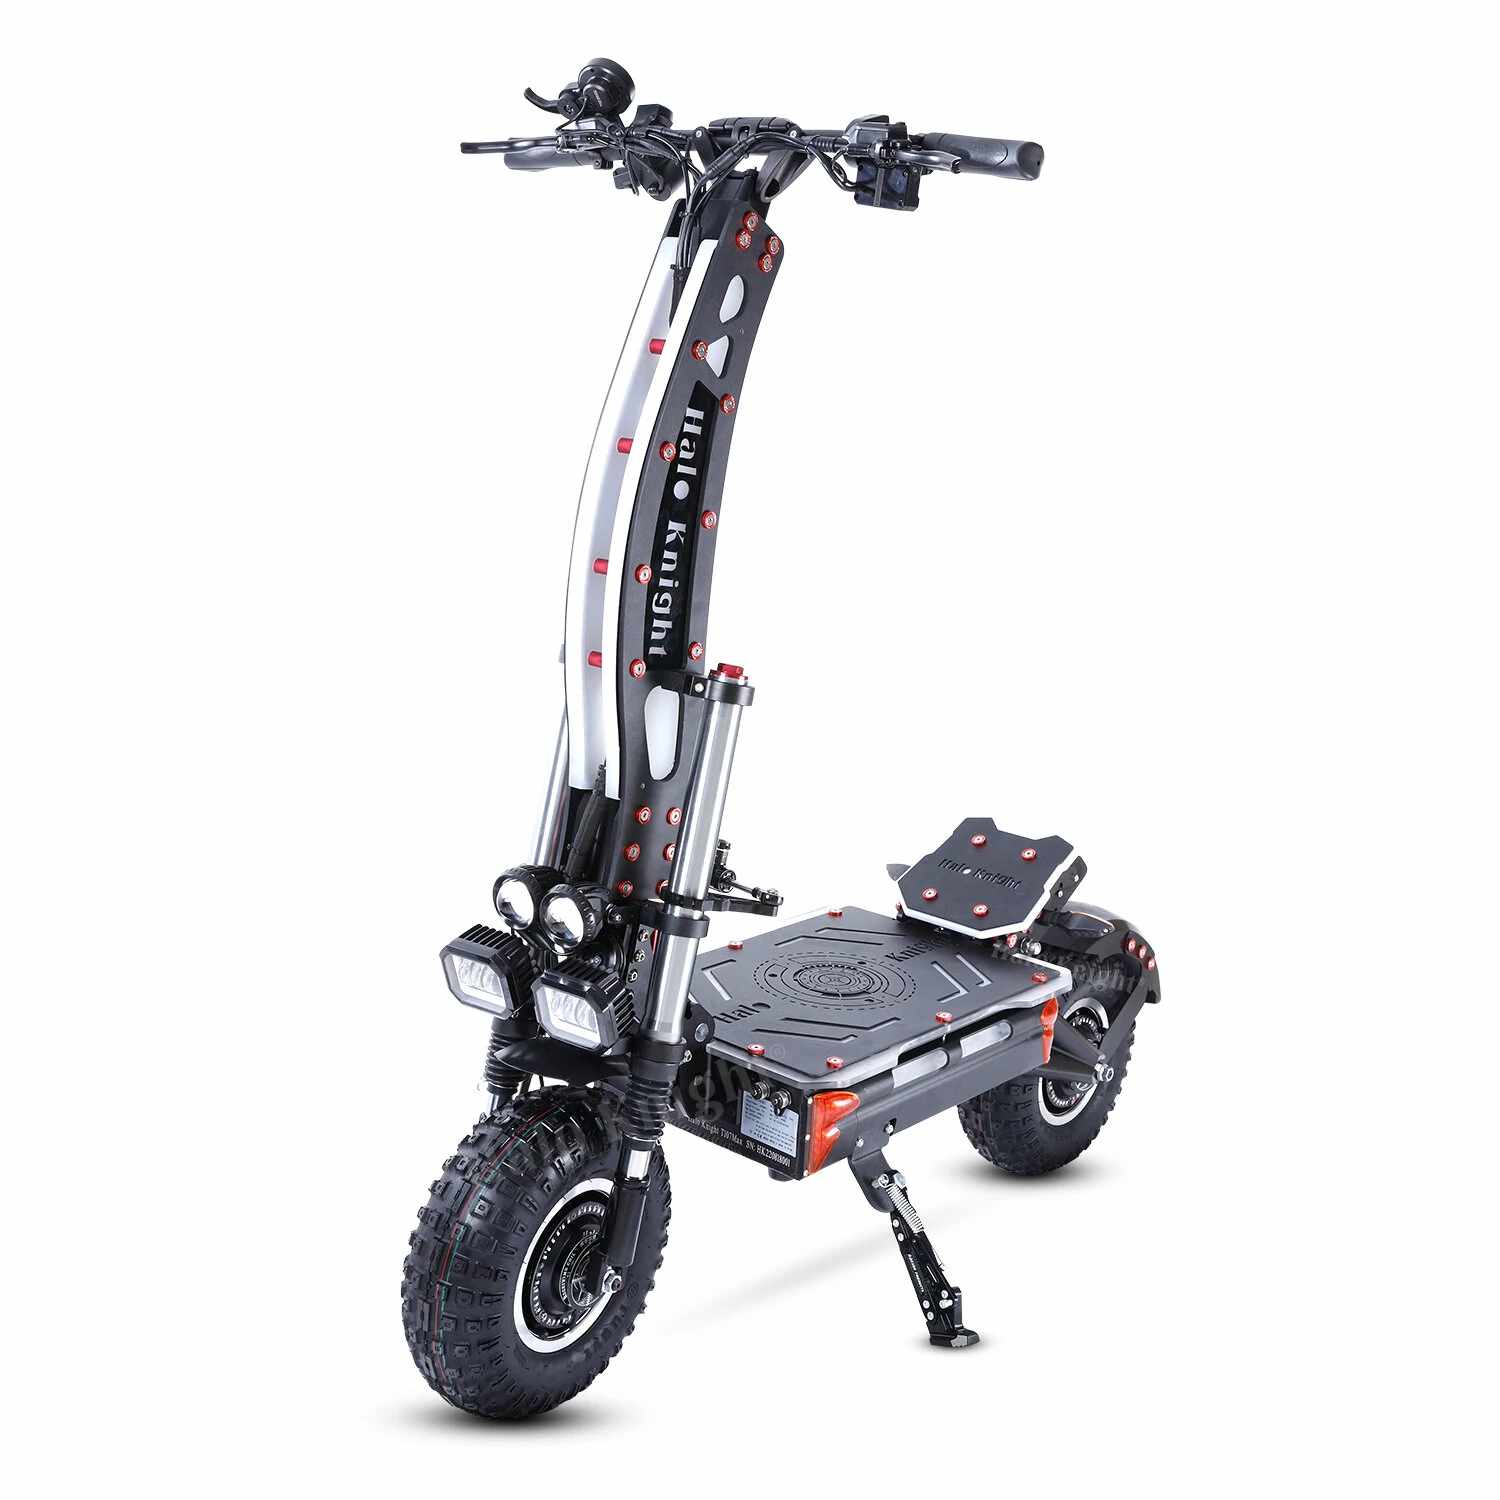 Halo Knight T107 MAX Electric Scooter Banggood Coupon Promo Code (CZ Warehouse)